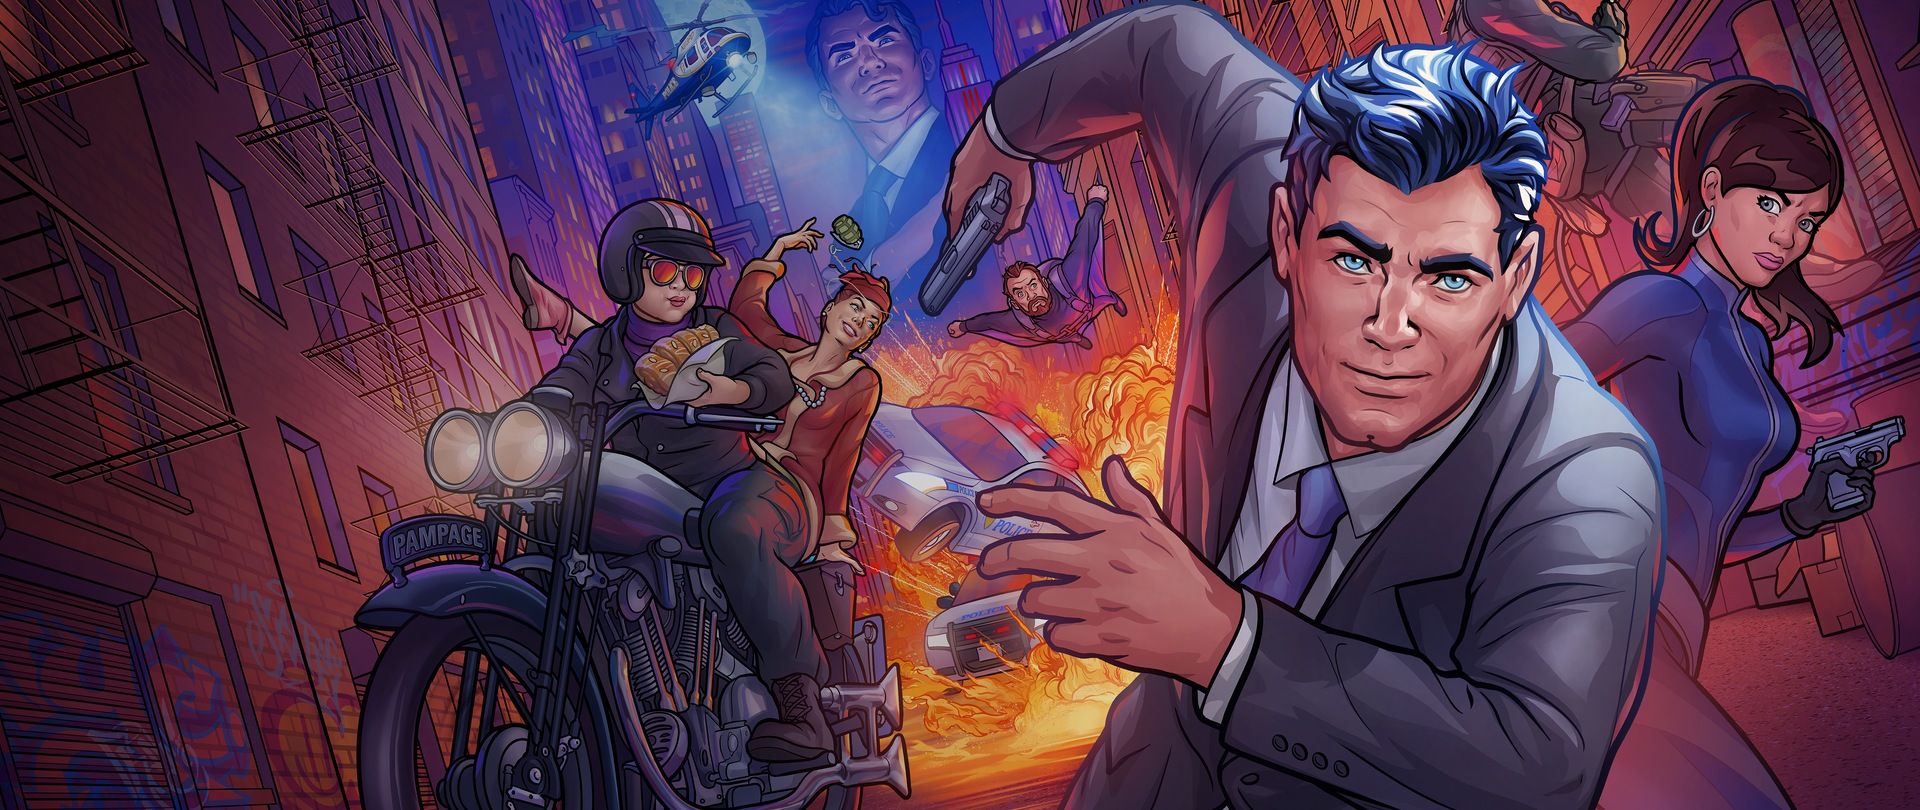 Cartoon secret agent in grey suit from Archer running on pothole from explosion in background alongside agents on motorcycle